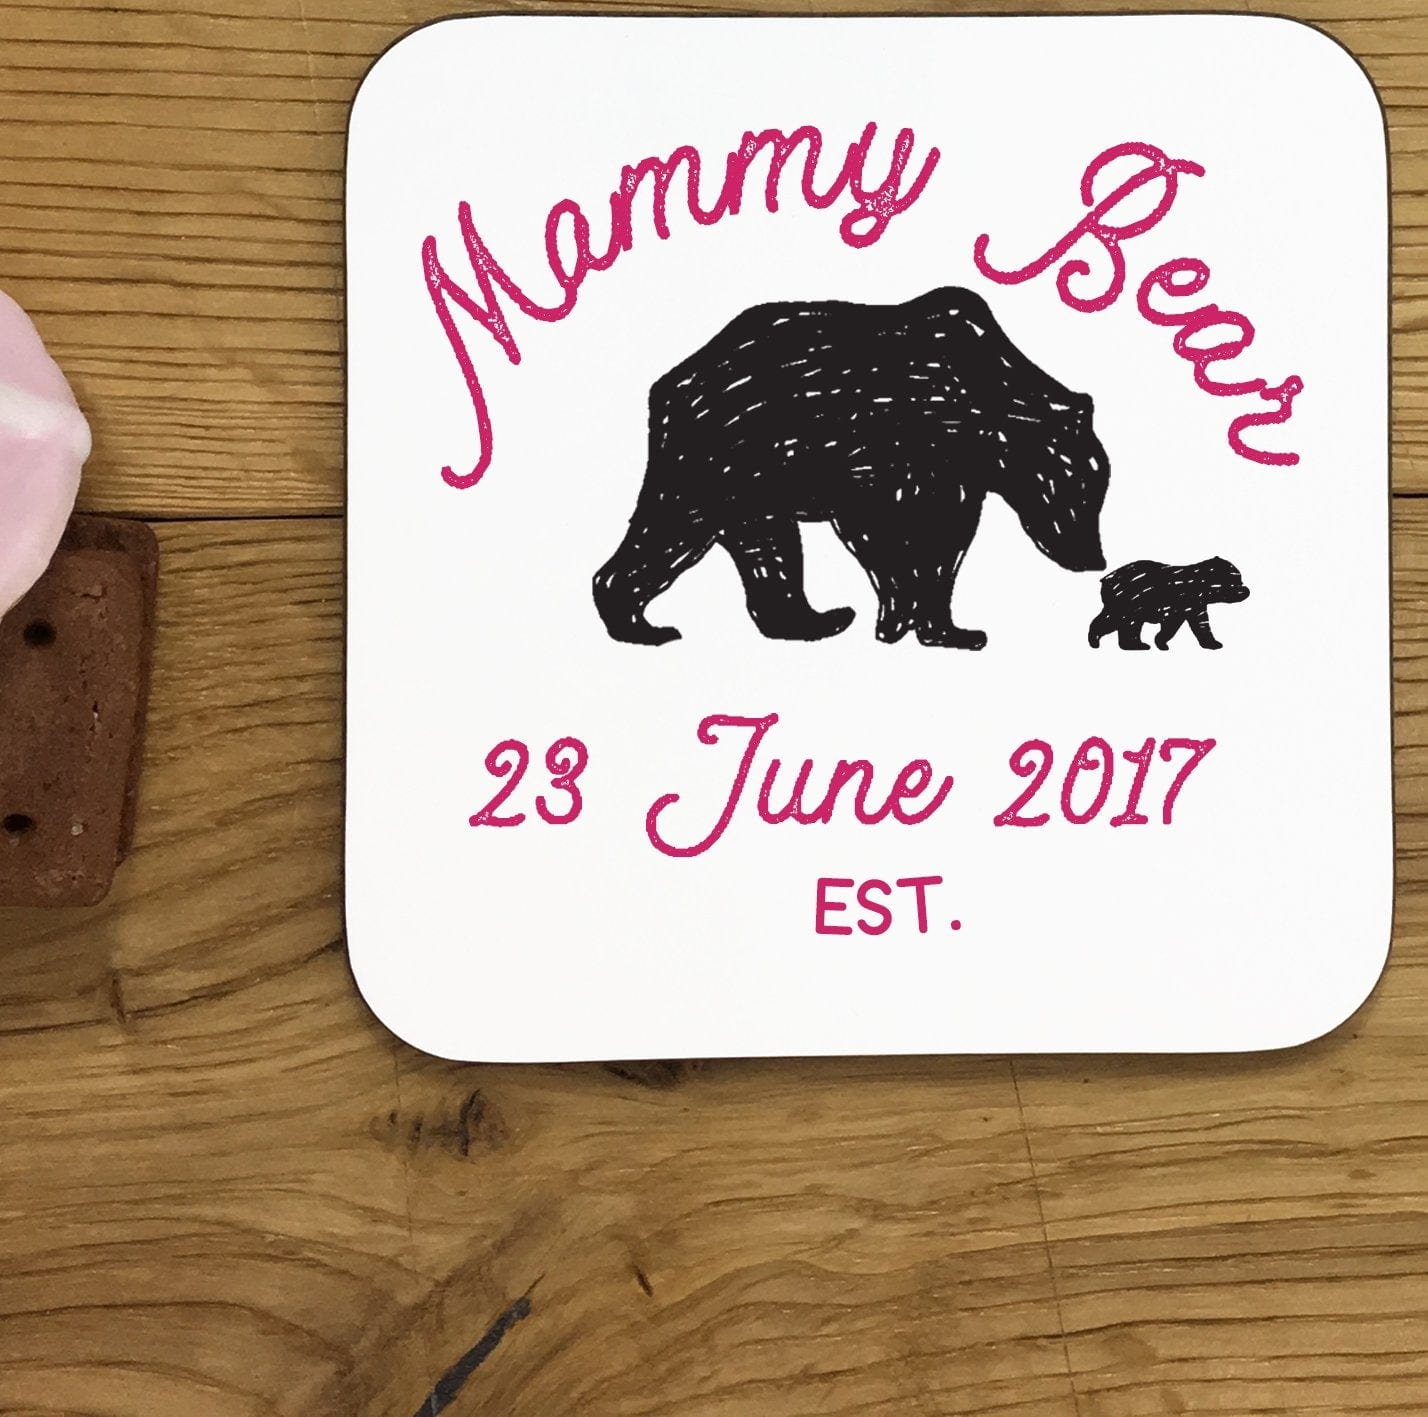 Momma bear mug perosnalised as a gift for mother's day